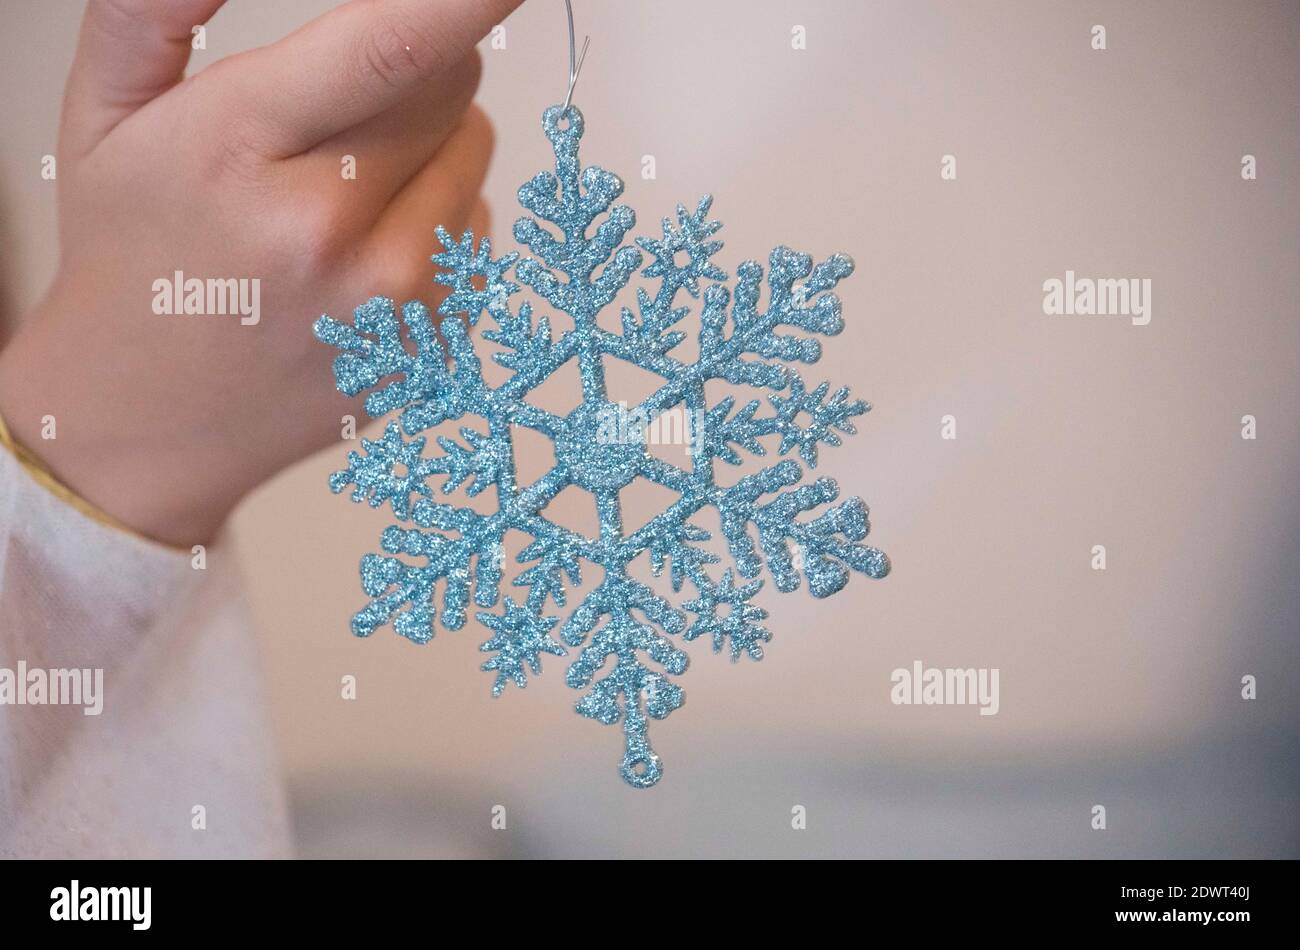 snow crystal or snow flake, symbol for  winter time and cold season Stock Photo